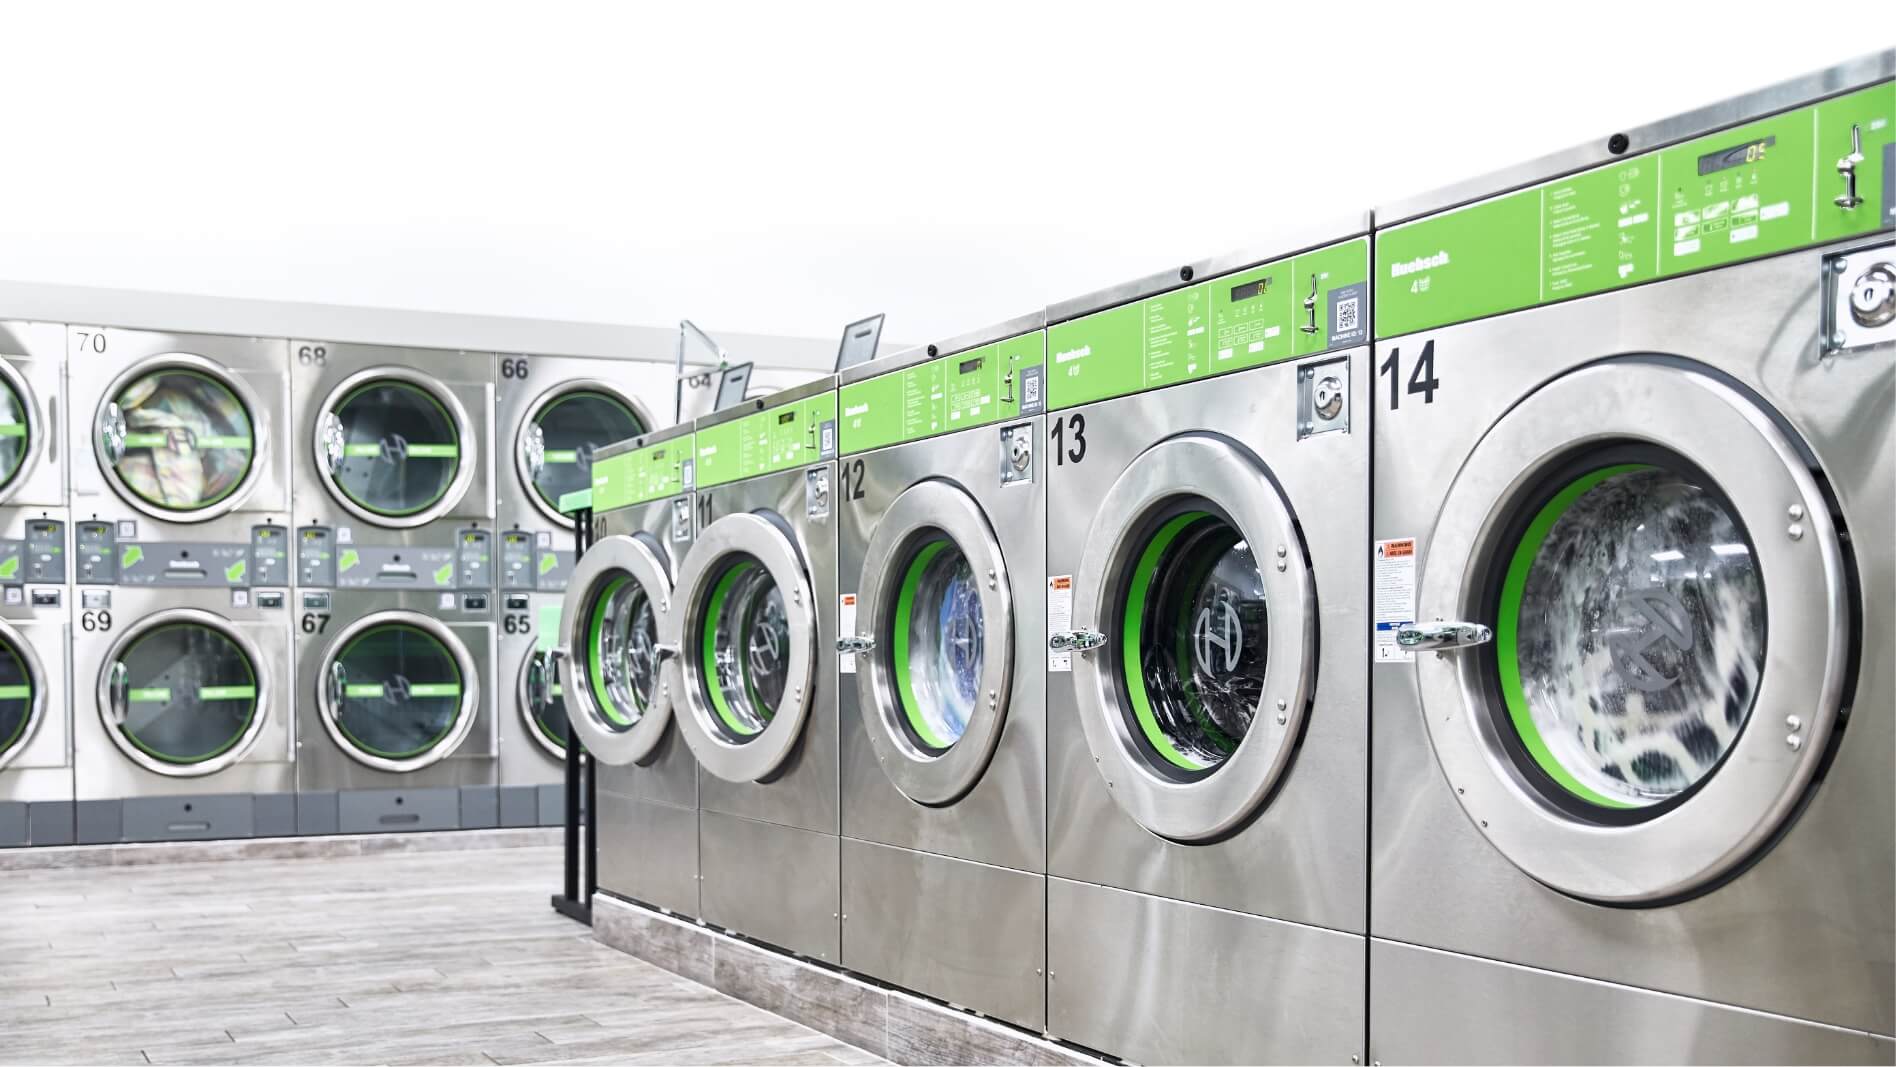 Huebsch Makes Laundry Simple with Easy-to-Use Technology.